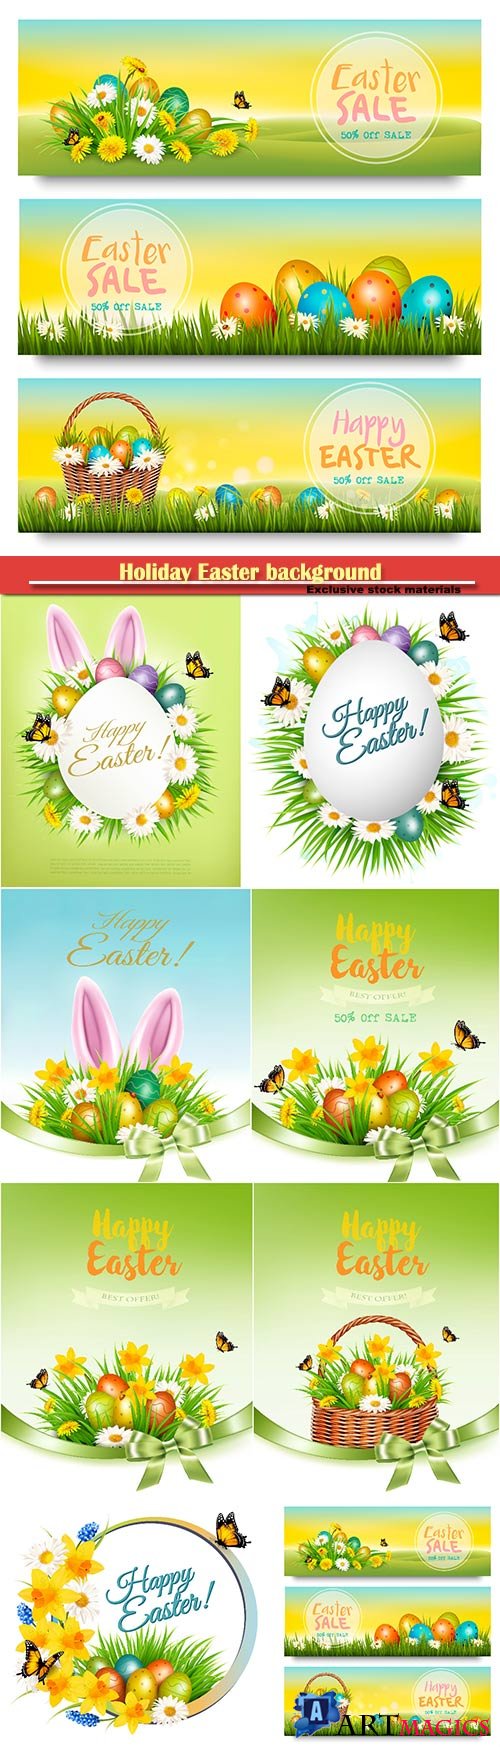 Holiday easter background with a colorful eggs and spring flowers